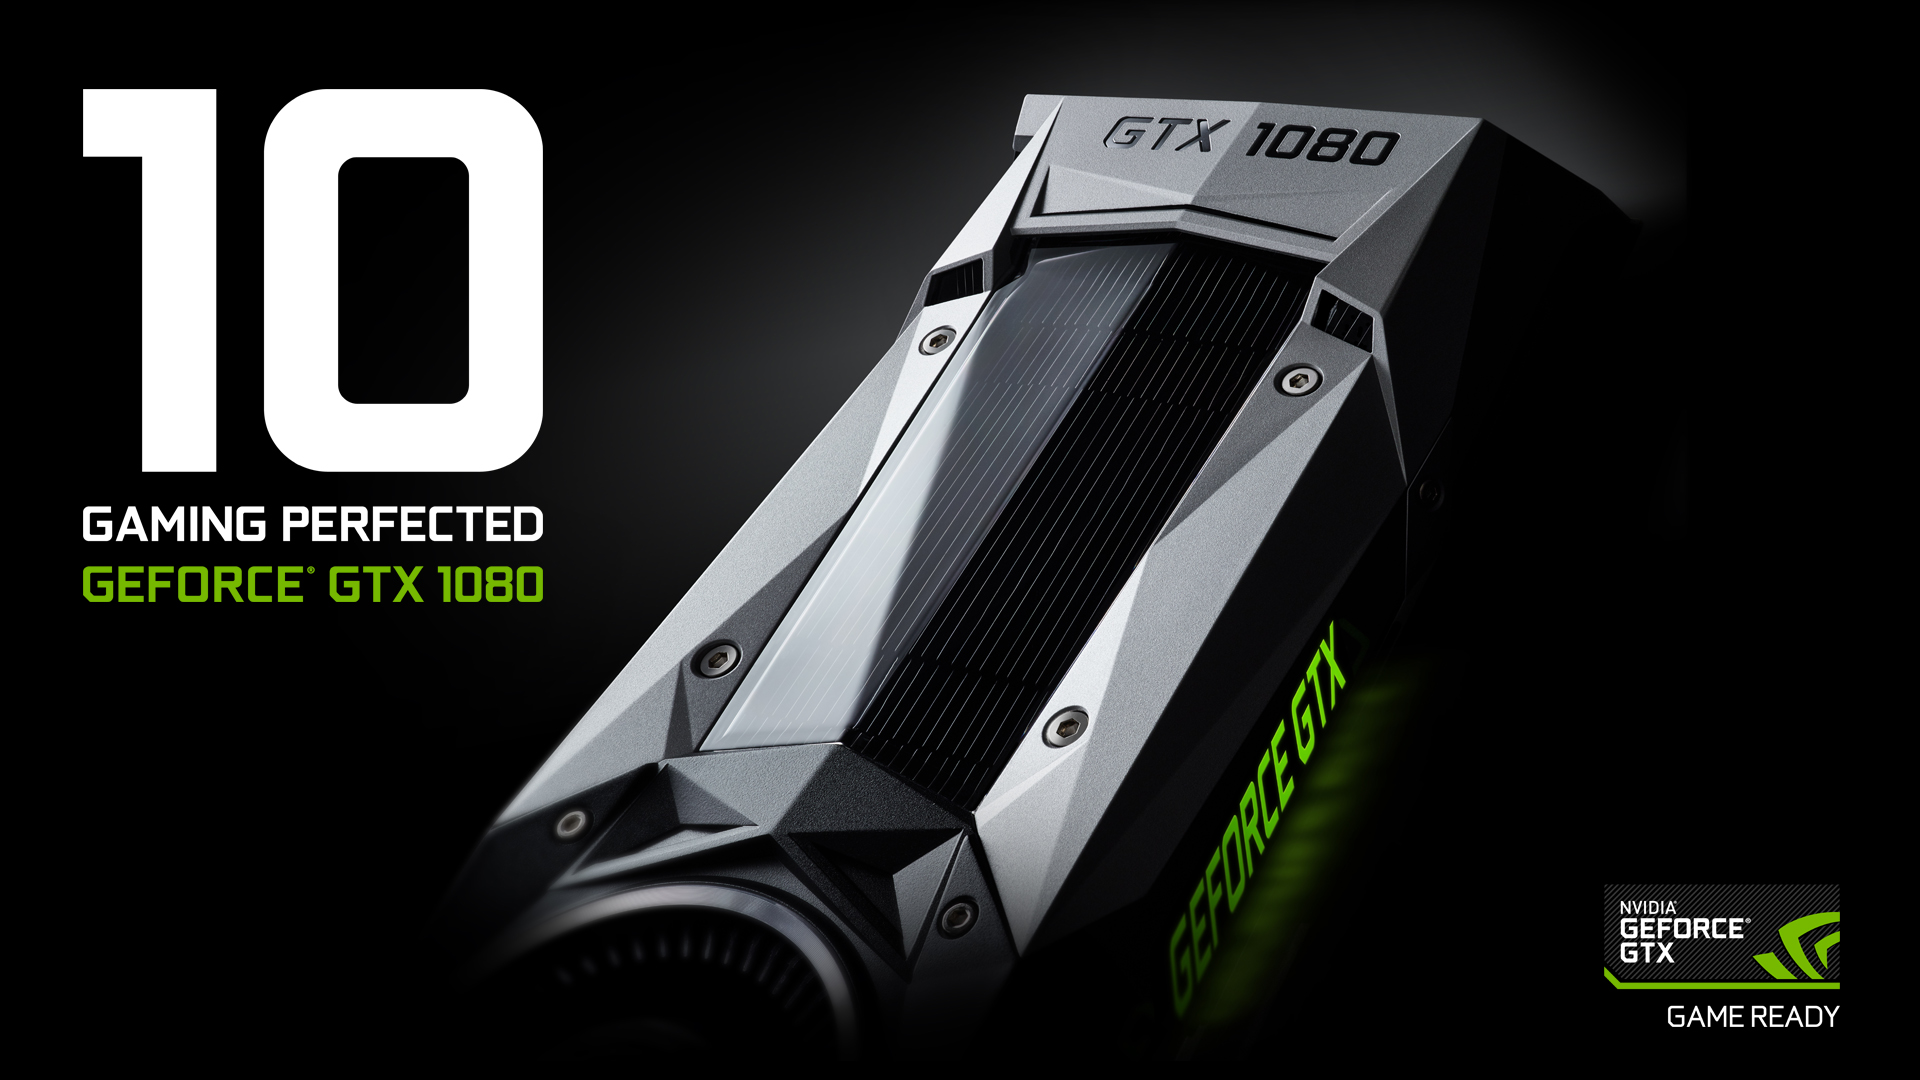 Introducing The GeForce GTX 1080: Gaming Perfected | GeForce News